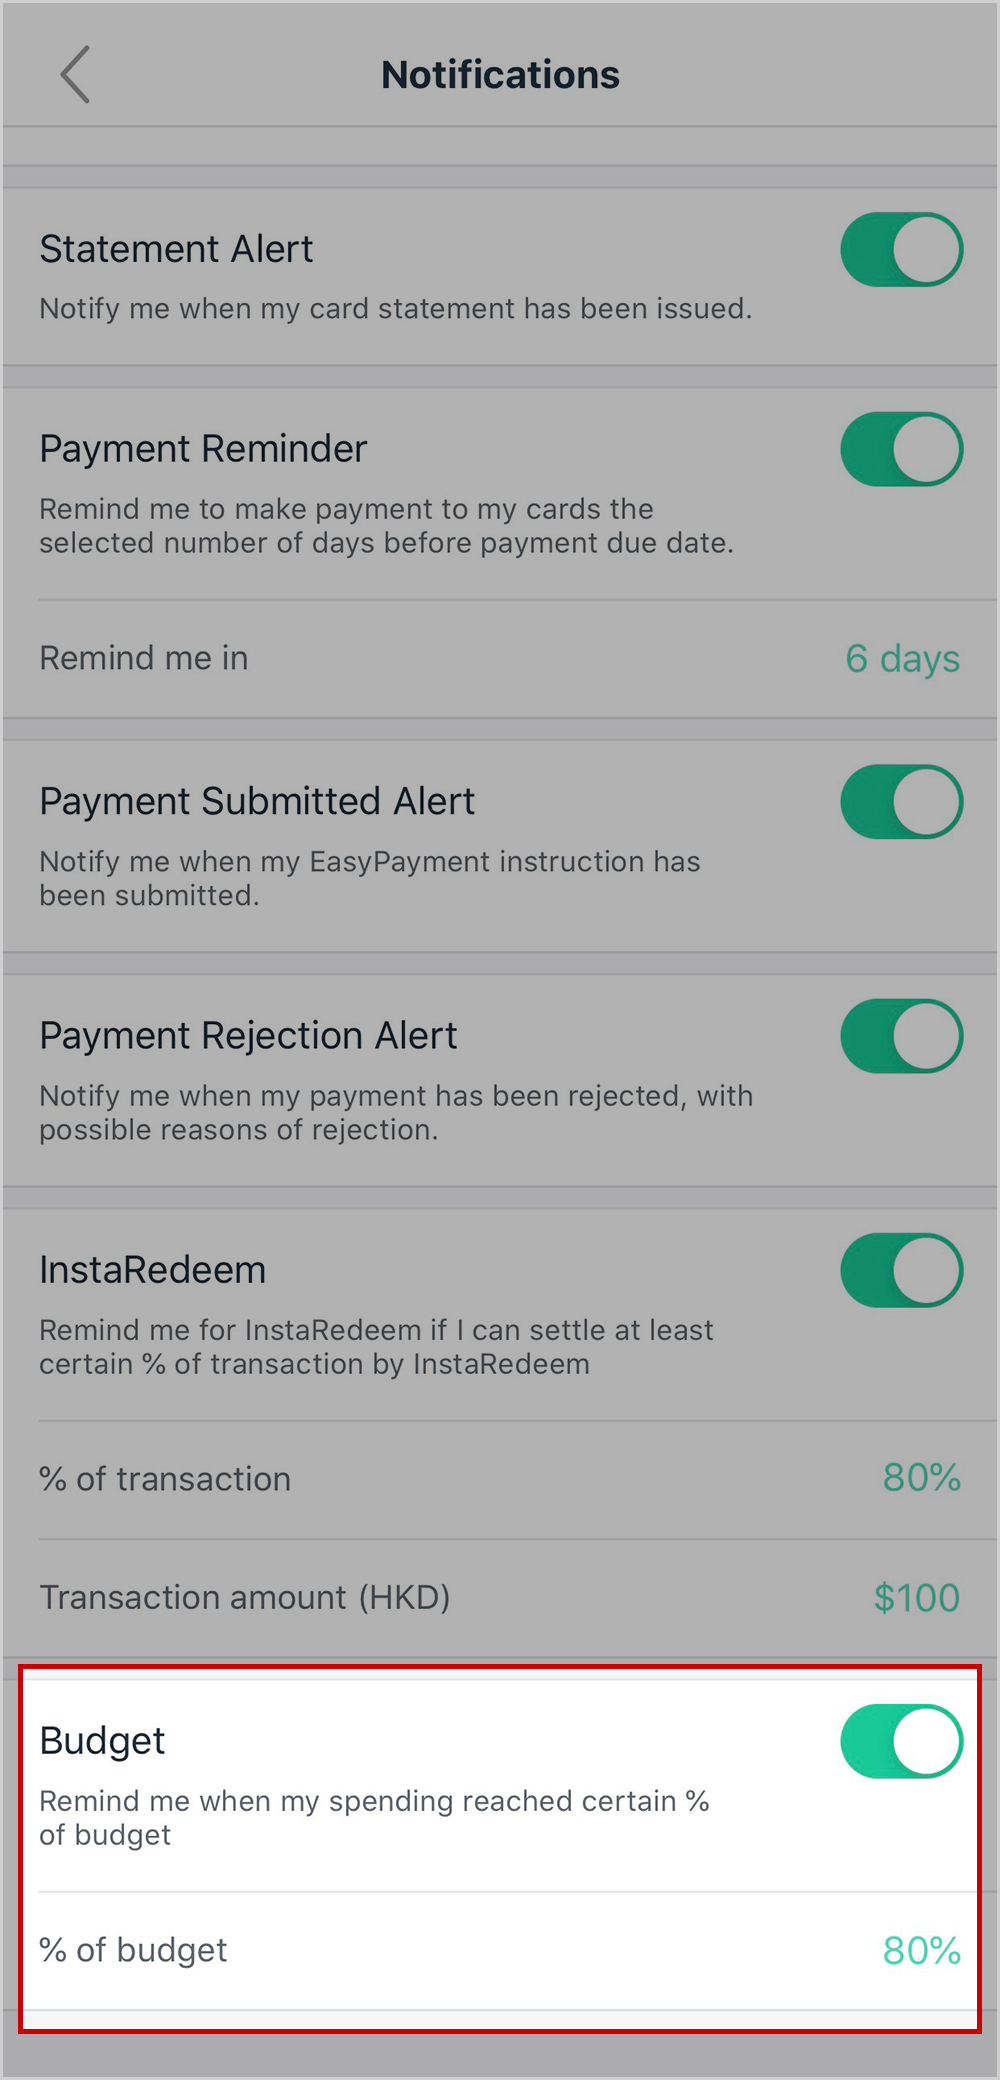 Turn on the notification of “Budget” and “% of budget” for the alert in More > Push Notifications